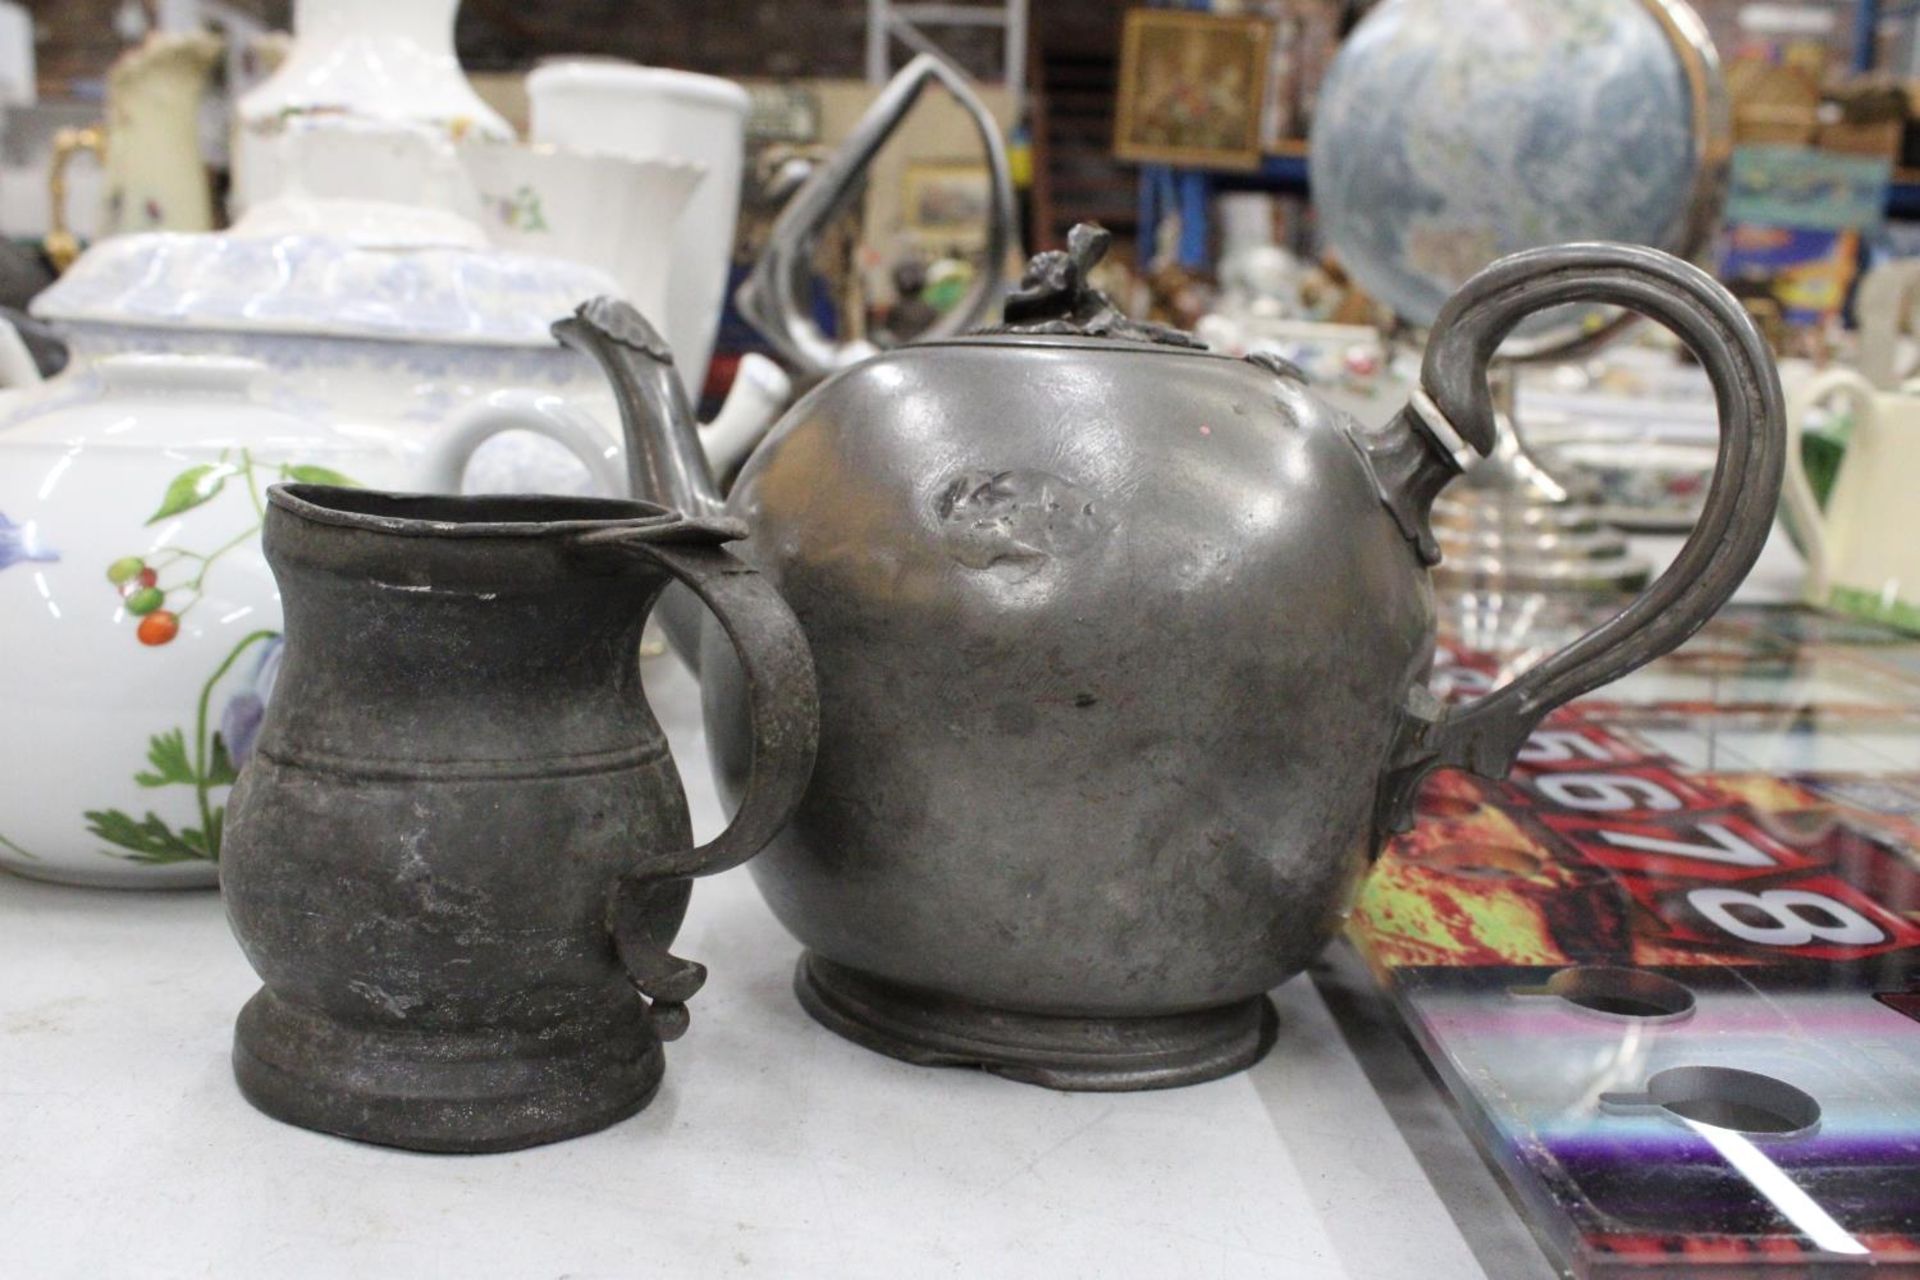 A GEORGIAN PEWTER TEAPOT AND A 14TH CENTURY PEWTER MUG - Image 5 of 5